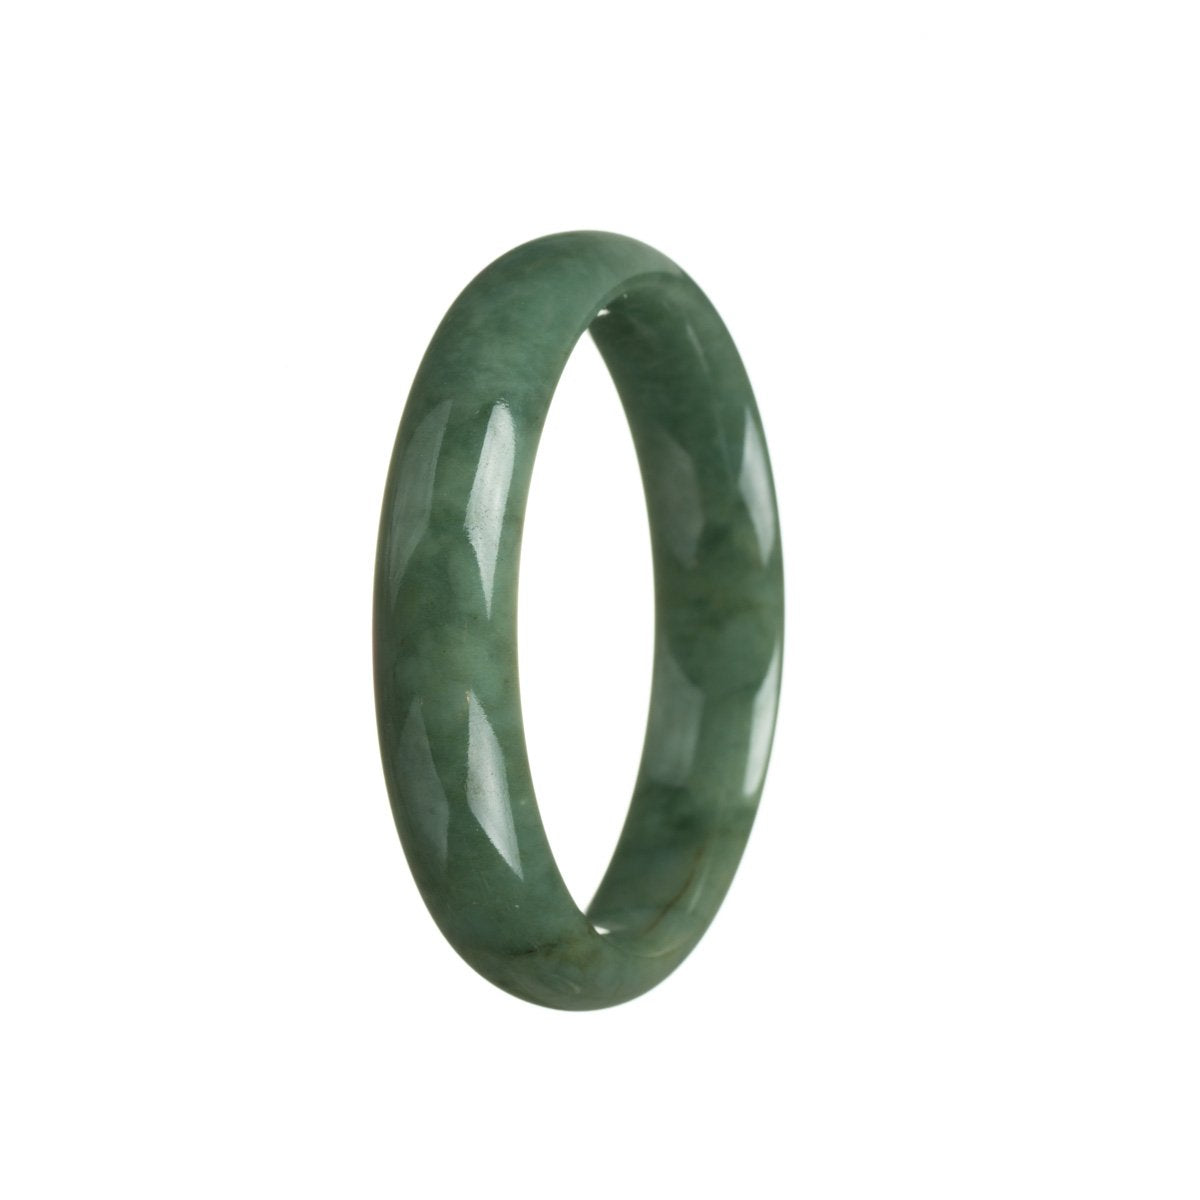 Image of a half-moon shaped bracelet made of authentic, natural deep green jadeite. The bracelet has a smooth and polished surface, showcasing the vibrant green color of the jadeite. It is 56mm in size and is a beautiful piece of jewelry from the brand MAYS.